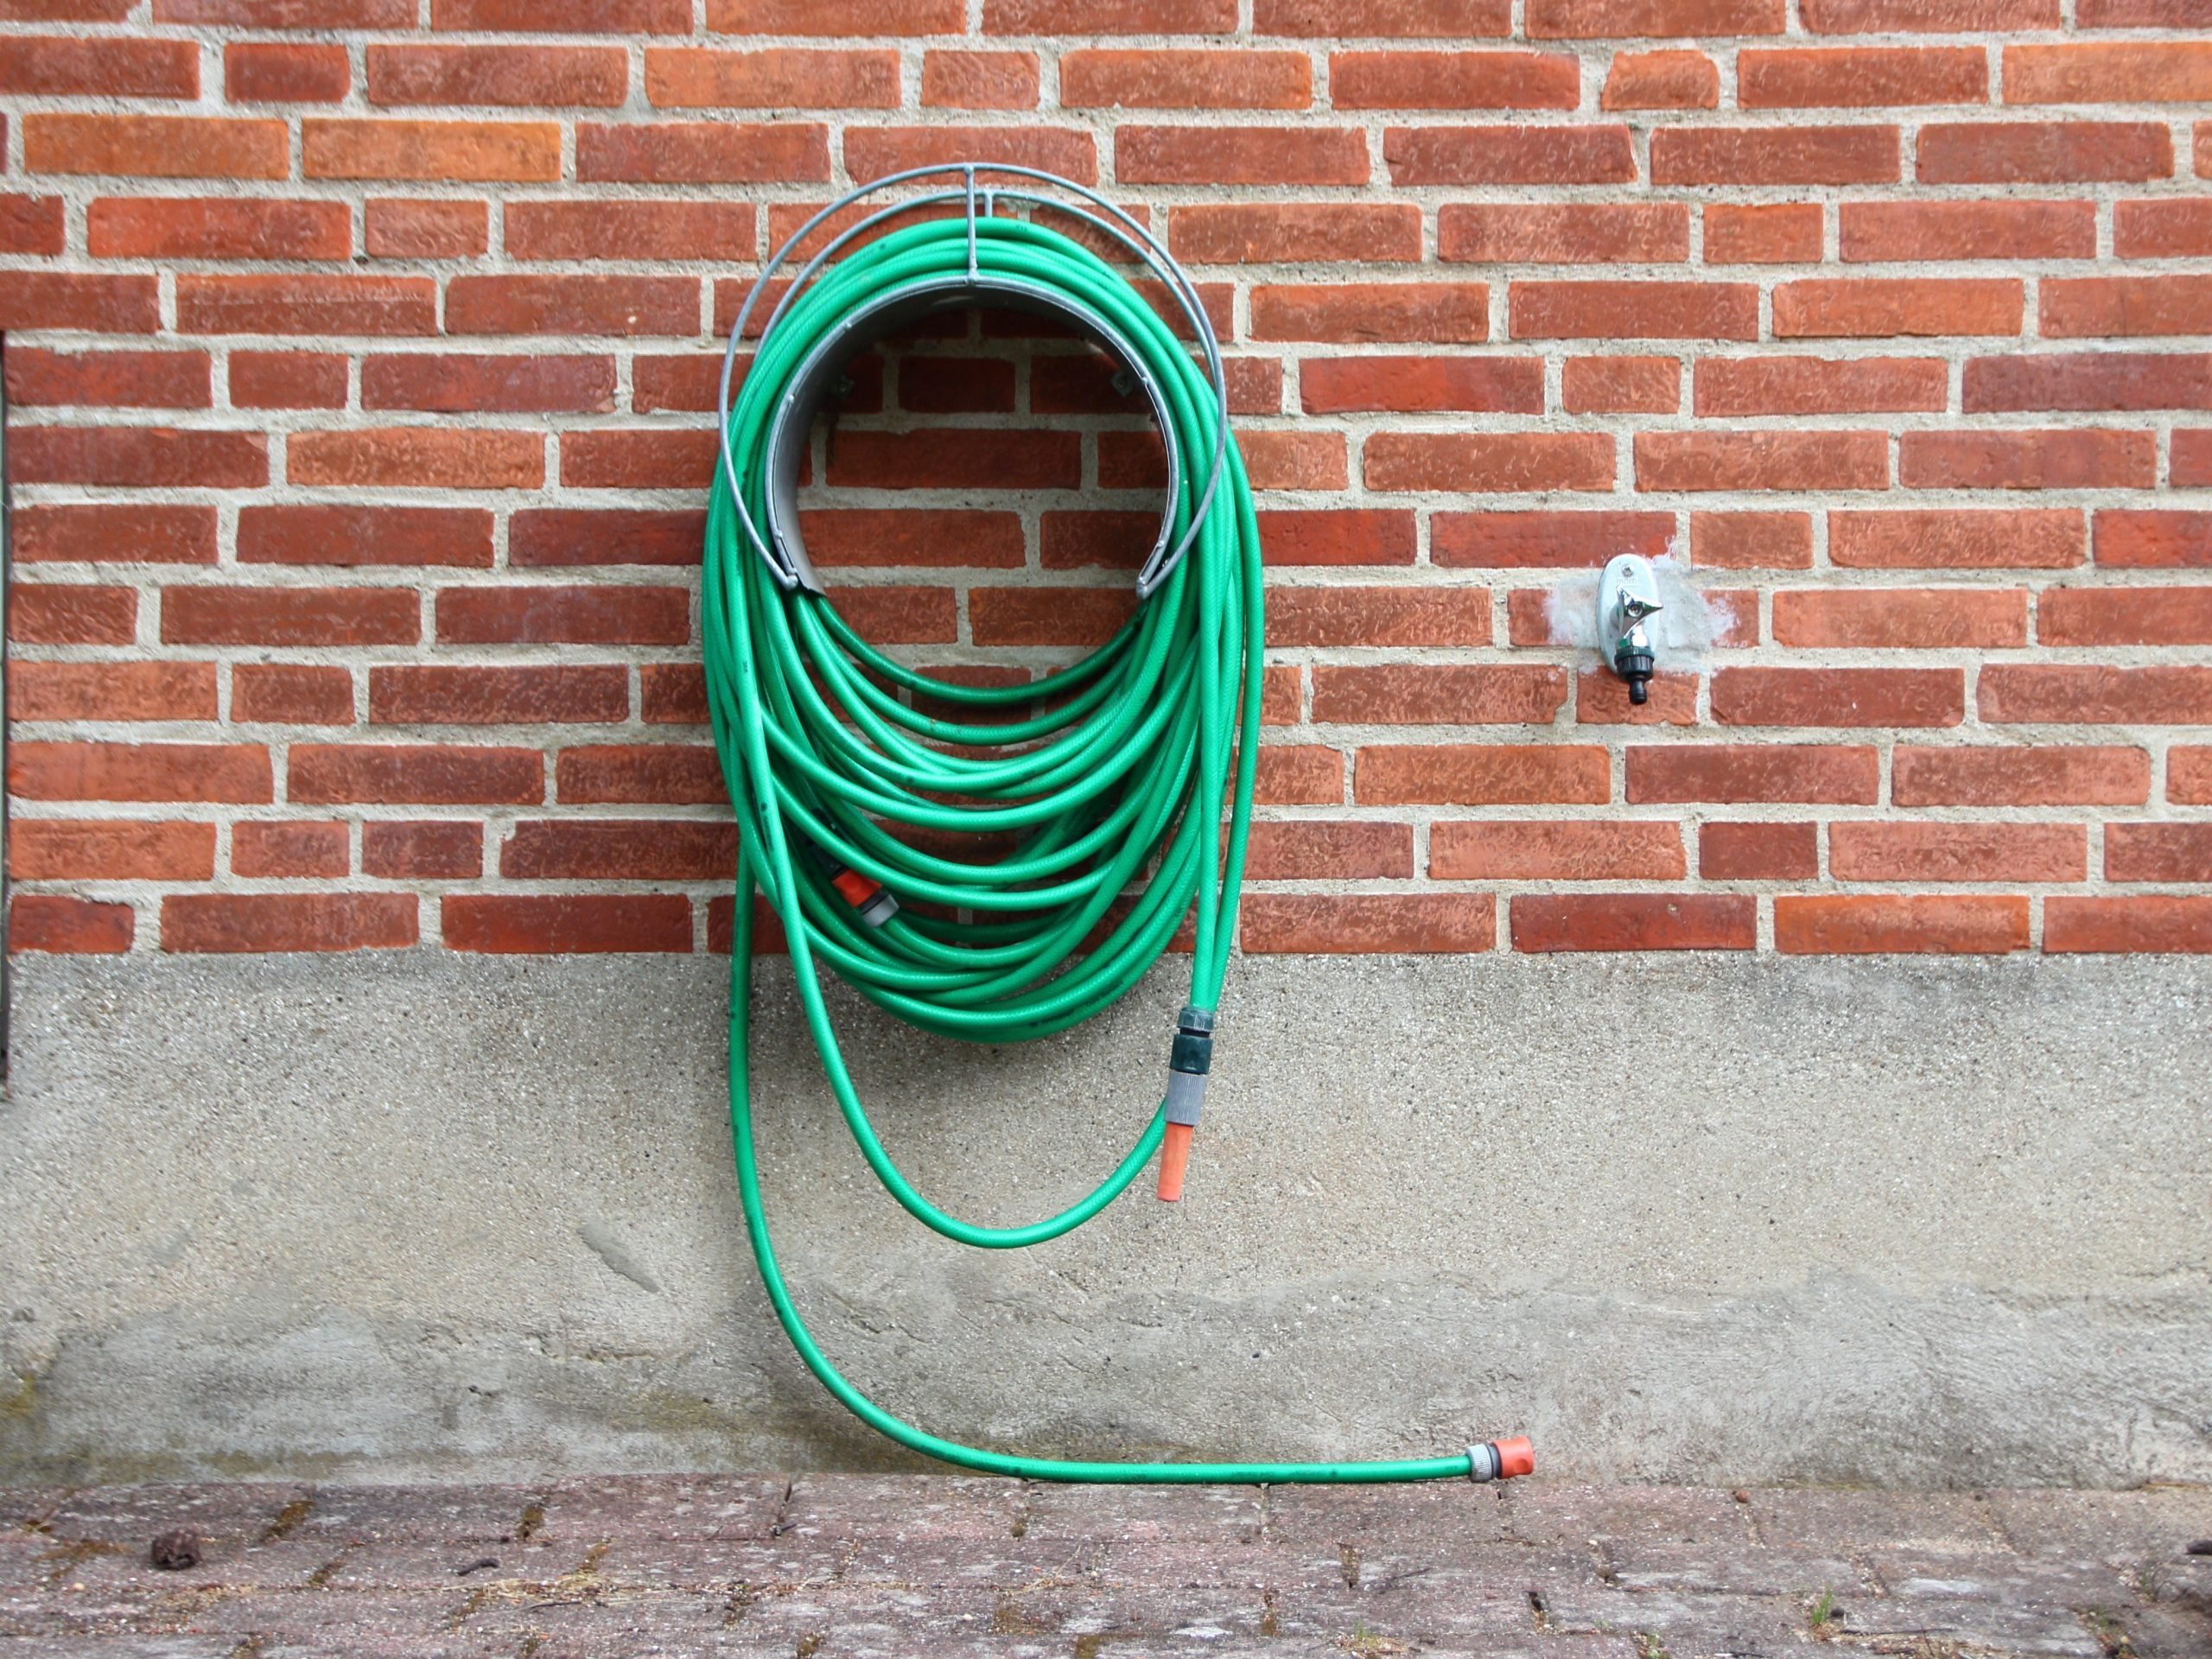 Green Garden Water Hose Hanging on Red Brick wall. Not connected to Water Tap.